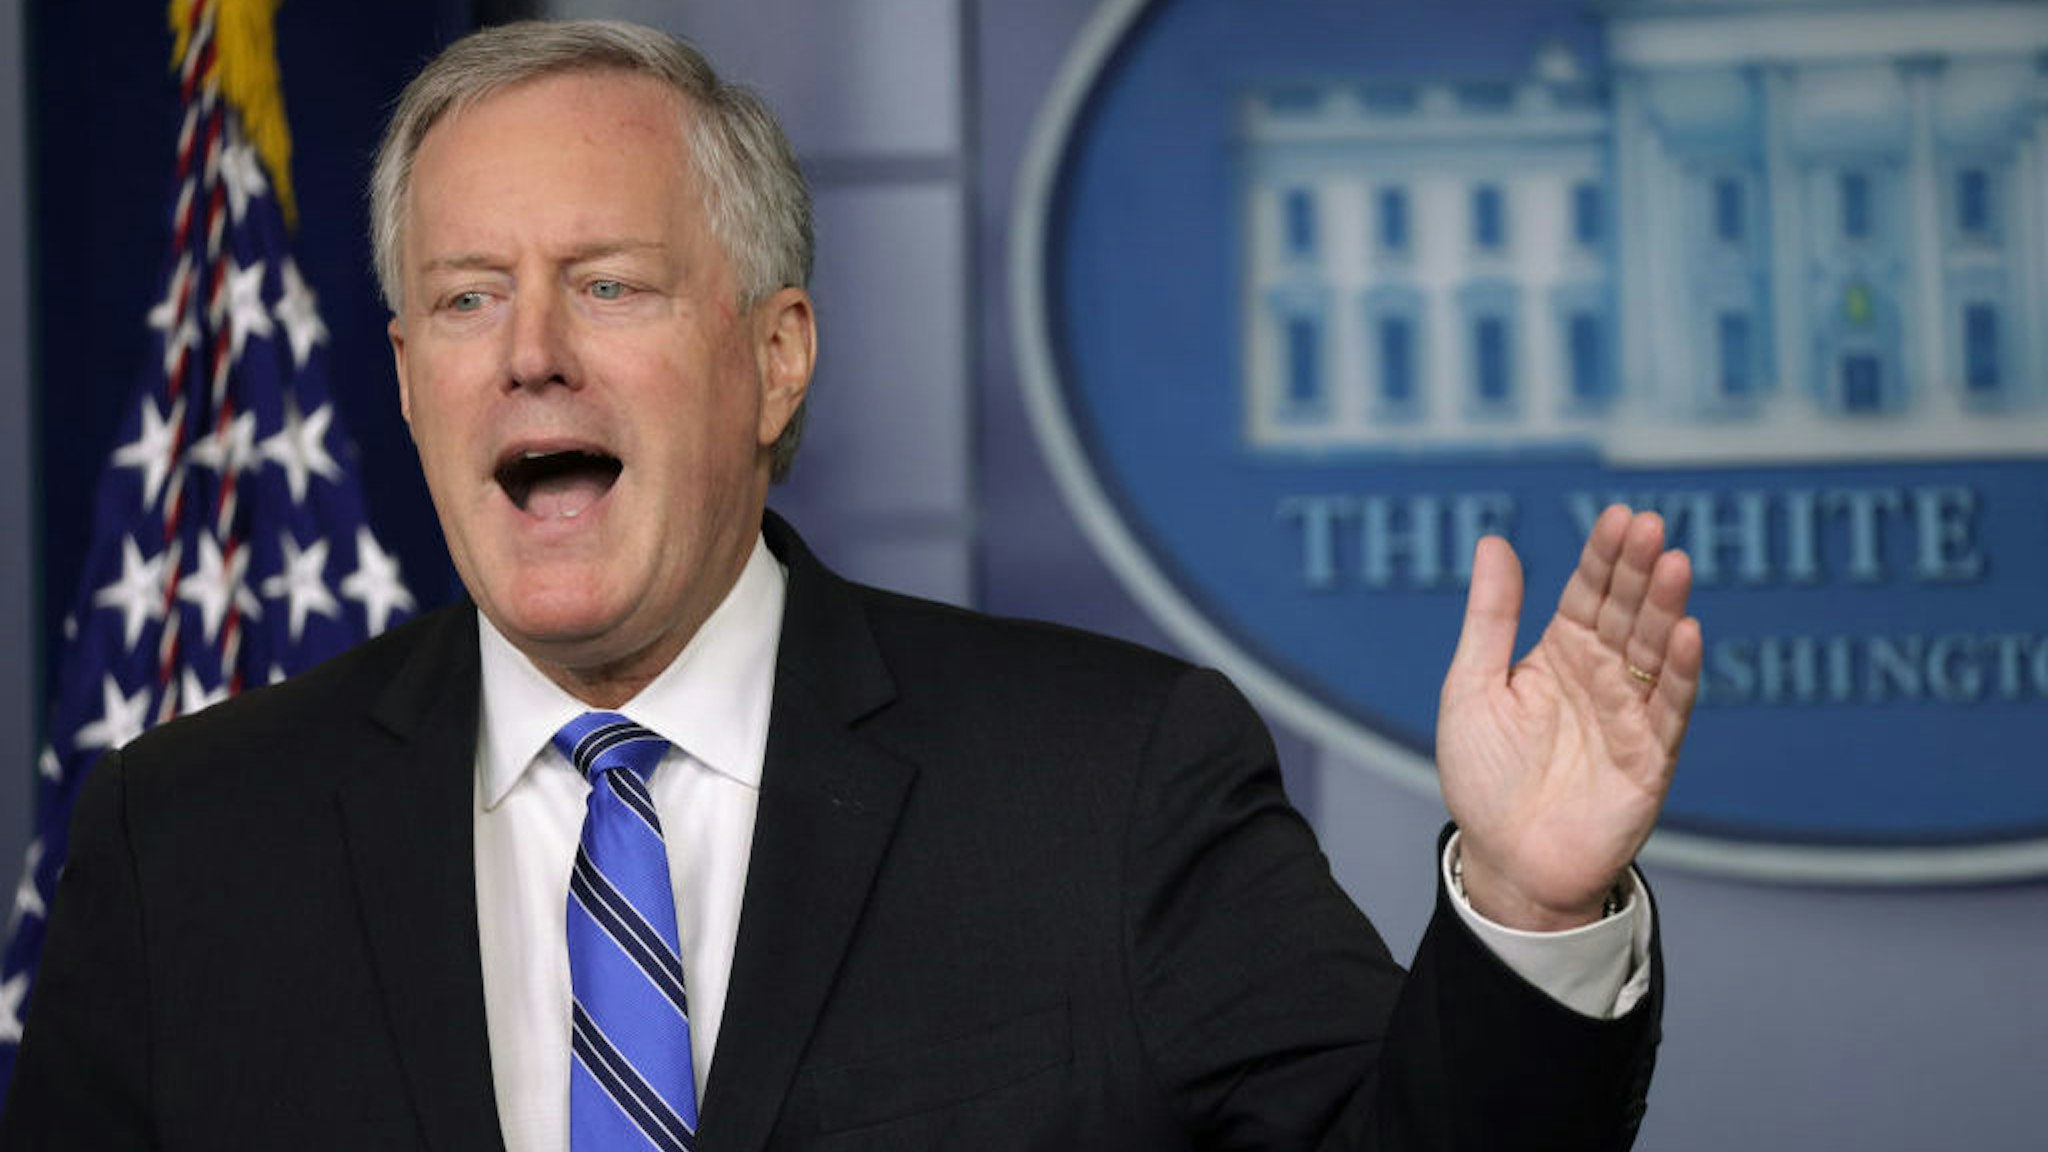 WASHINGTON, DC - JULY 31: White House Chief of Staff Mark Meadows speaks during a news briefing in the James Brady Press Briefing Room of the White House July 31, 2020 in Washington, DC. Meadows spoke on the new COVID-19 stimulus package that is being negotiated on Capitol Hill. (Photo by Alex Wong/Getty Images)